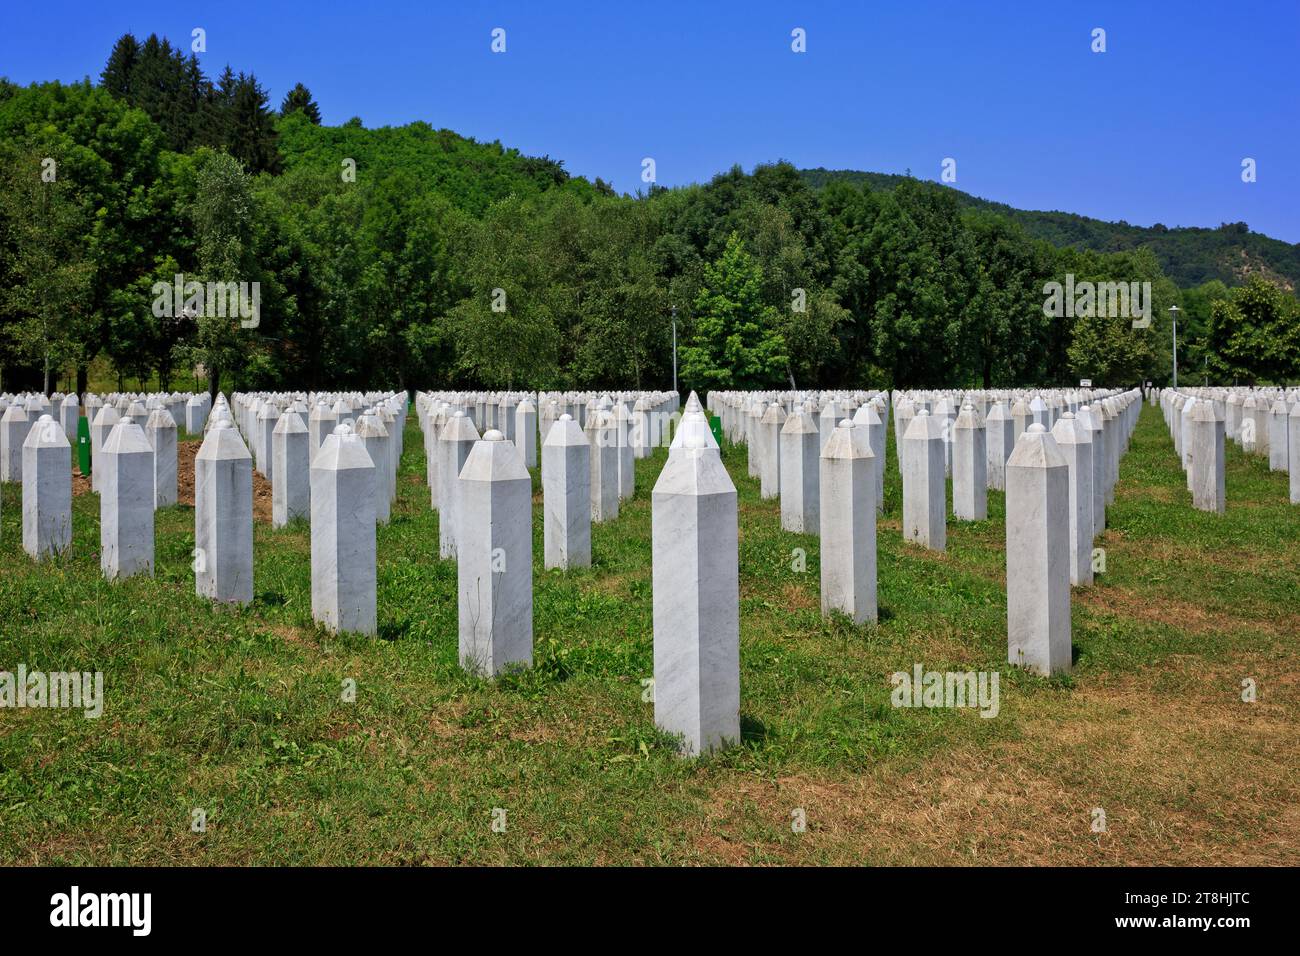 Cemetery with the graves of the muslim victims of the Srebrenica Genocide (1995) at Potocari, Bosnia and Herzegovina Stock Photo